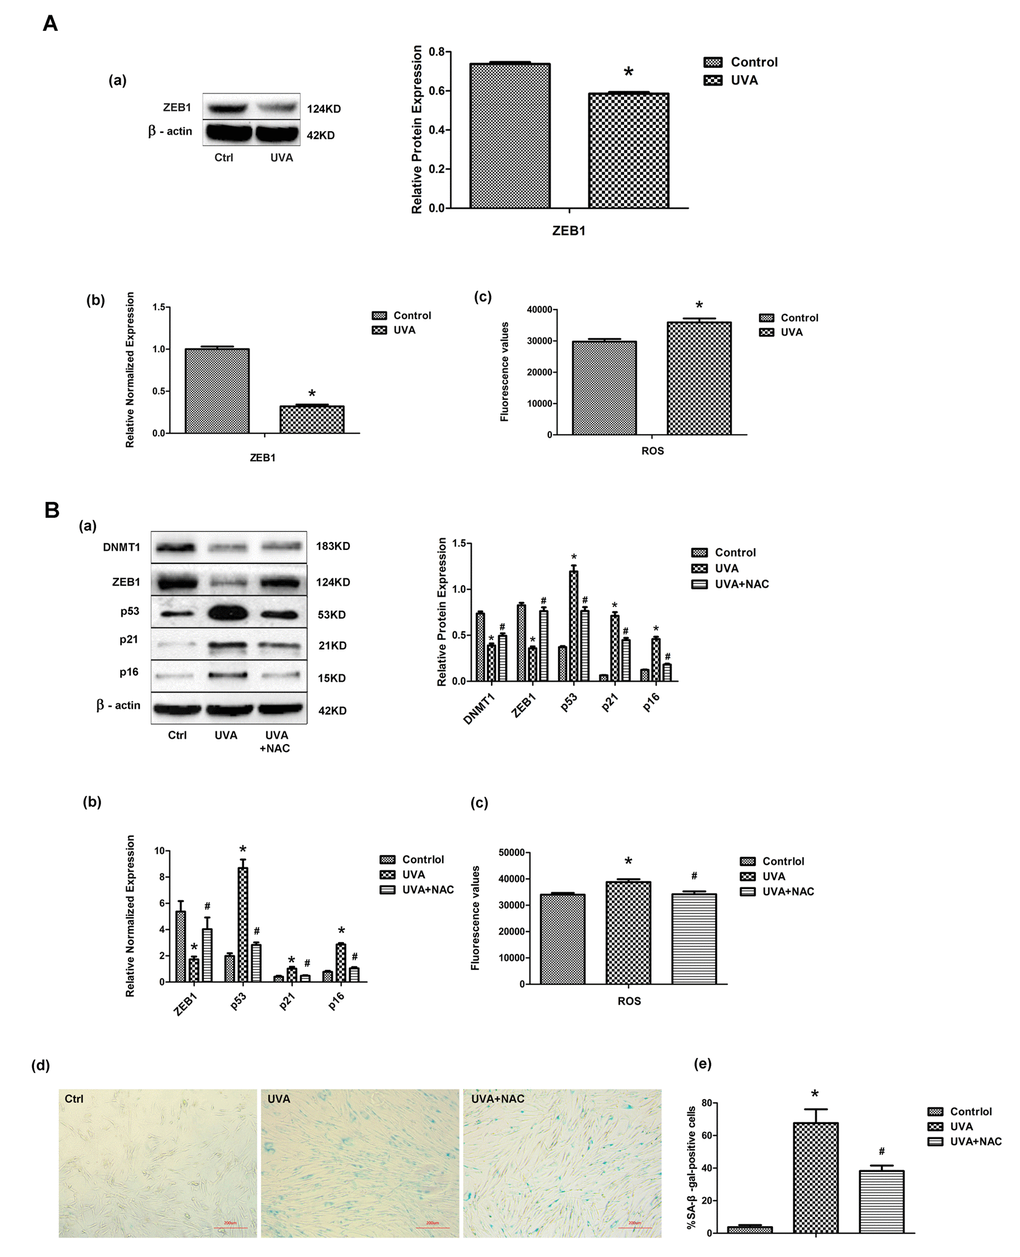 UVA irradiation regulates transcription factor ZEB1 via ROS. (A) ZEB1 mRNA (a) and protein (b) expression, assessed by real-time PCR and Western blotting, respectively, in irradiated and non-irradiated HDFs. Experiments were performed in triplicate. Intracellular ROS levels were assessed by measuring dichlorofluorescein (DCF) in triplicate experiments. * vs control, P B) Following treatment with N-acetyl-L-cysteine (NAC), the expression of ZEB1, p53, p21, and p16 was assessed at the protein (a) and mRNA (b) levels. Experiments were performed in triplicate. * vs control or UVA, P 